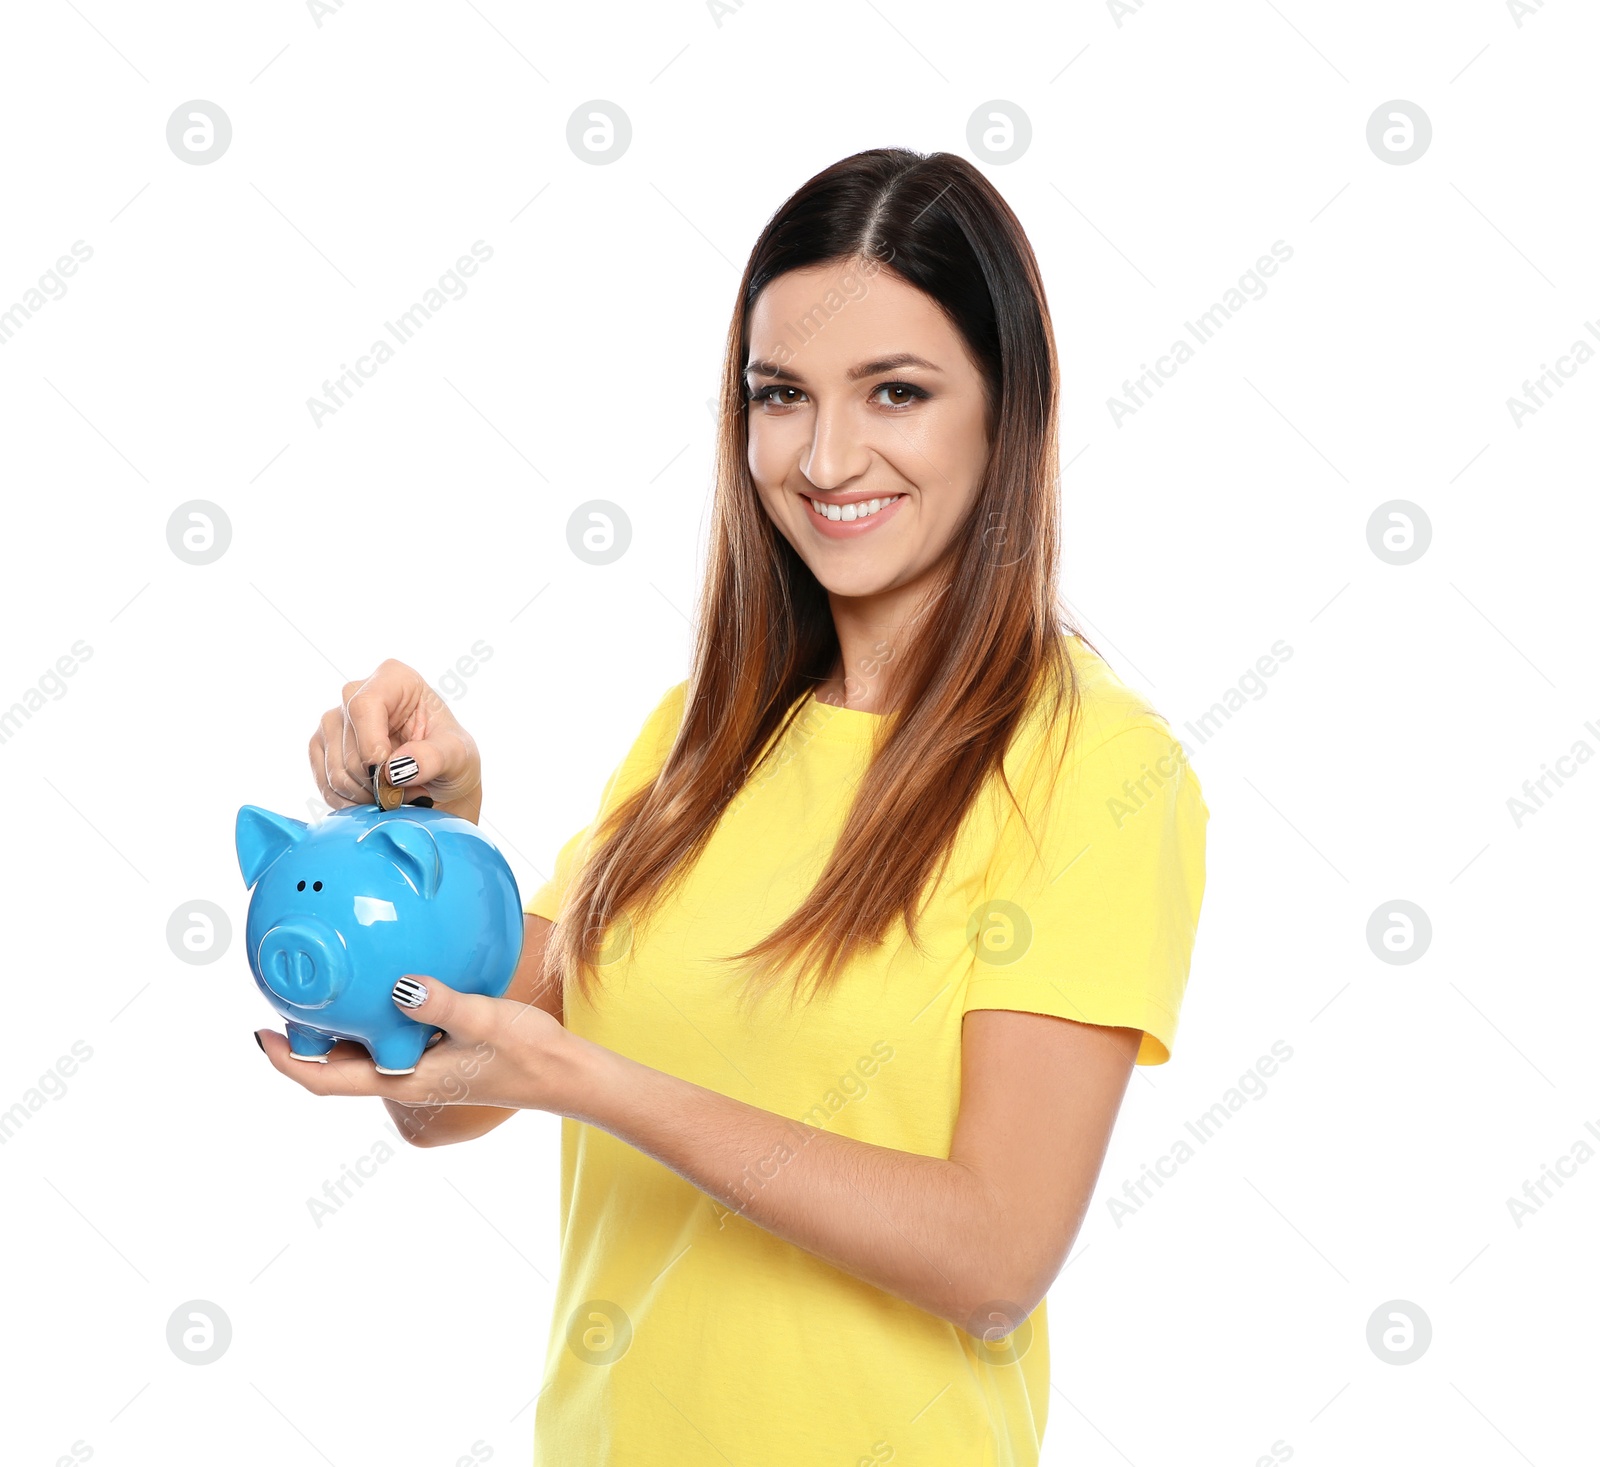 Photo of Young woman putting coin into piggy bank on white background